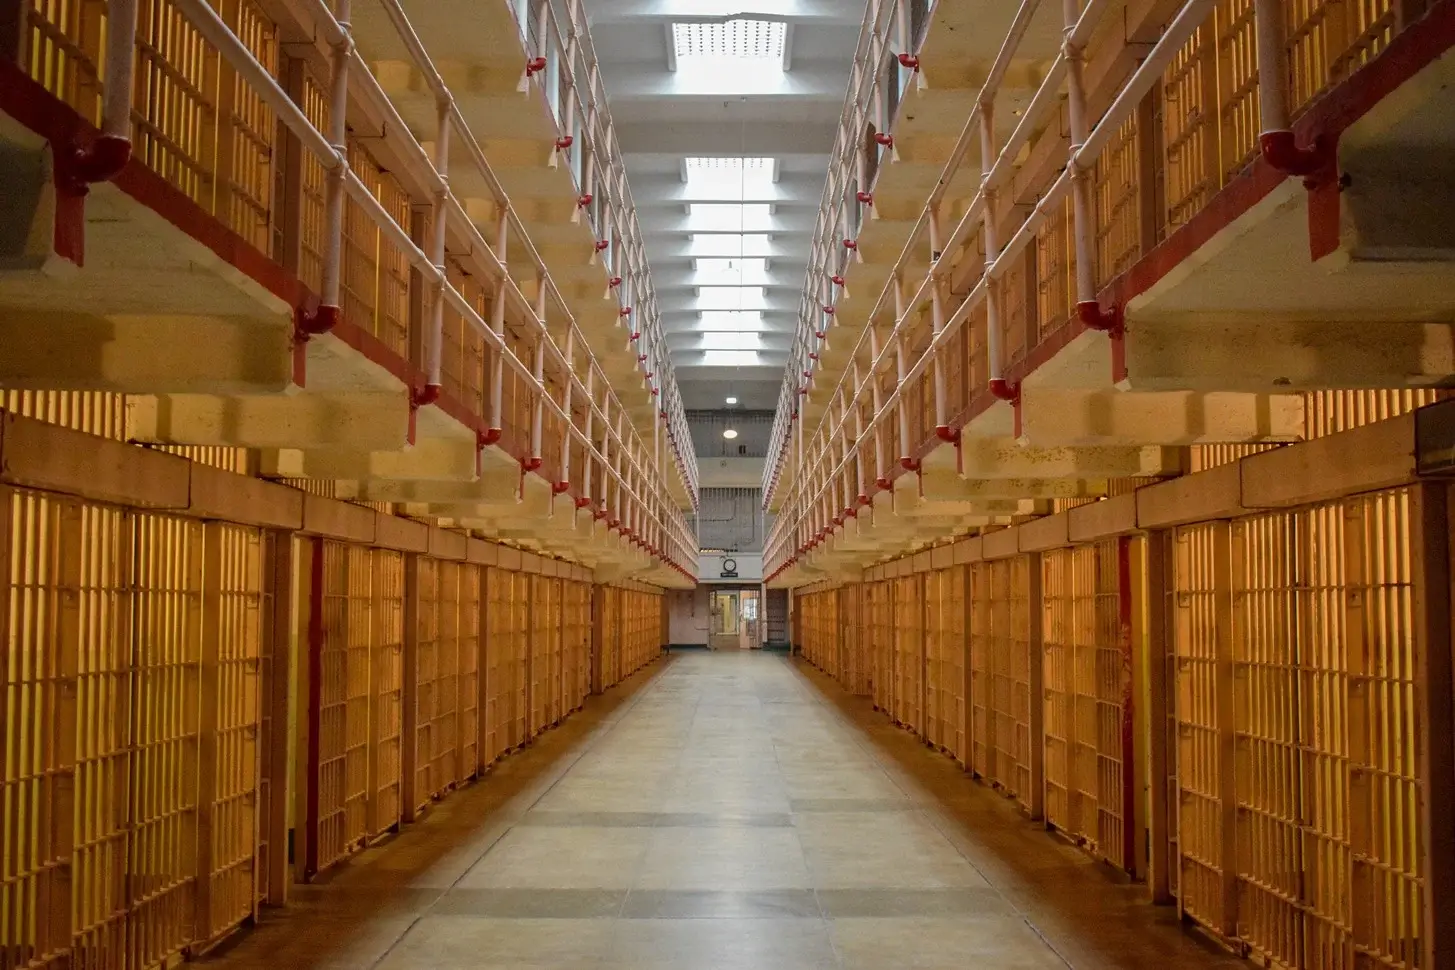 Photo of rows of prison cells.